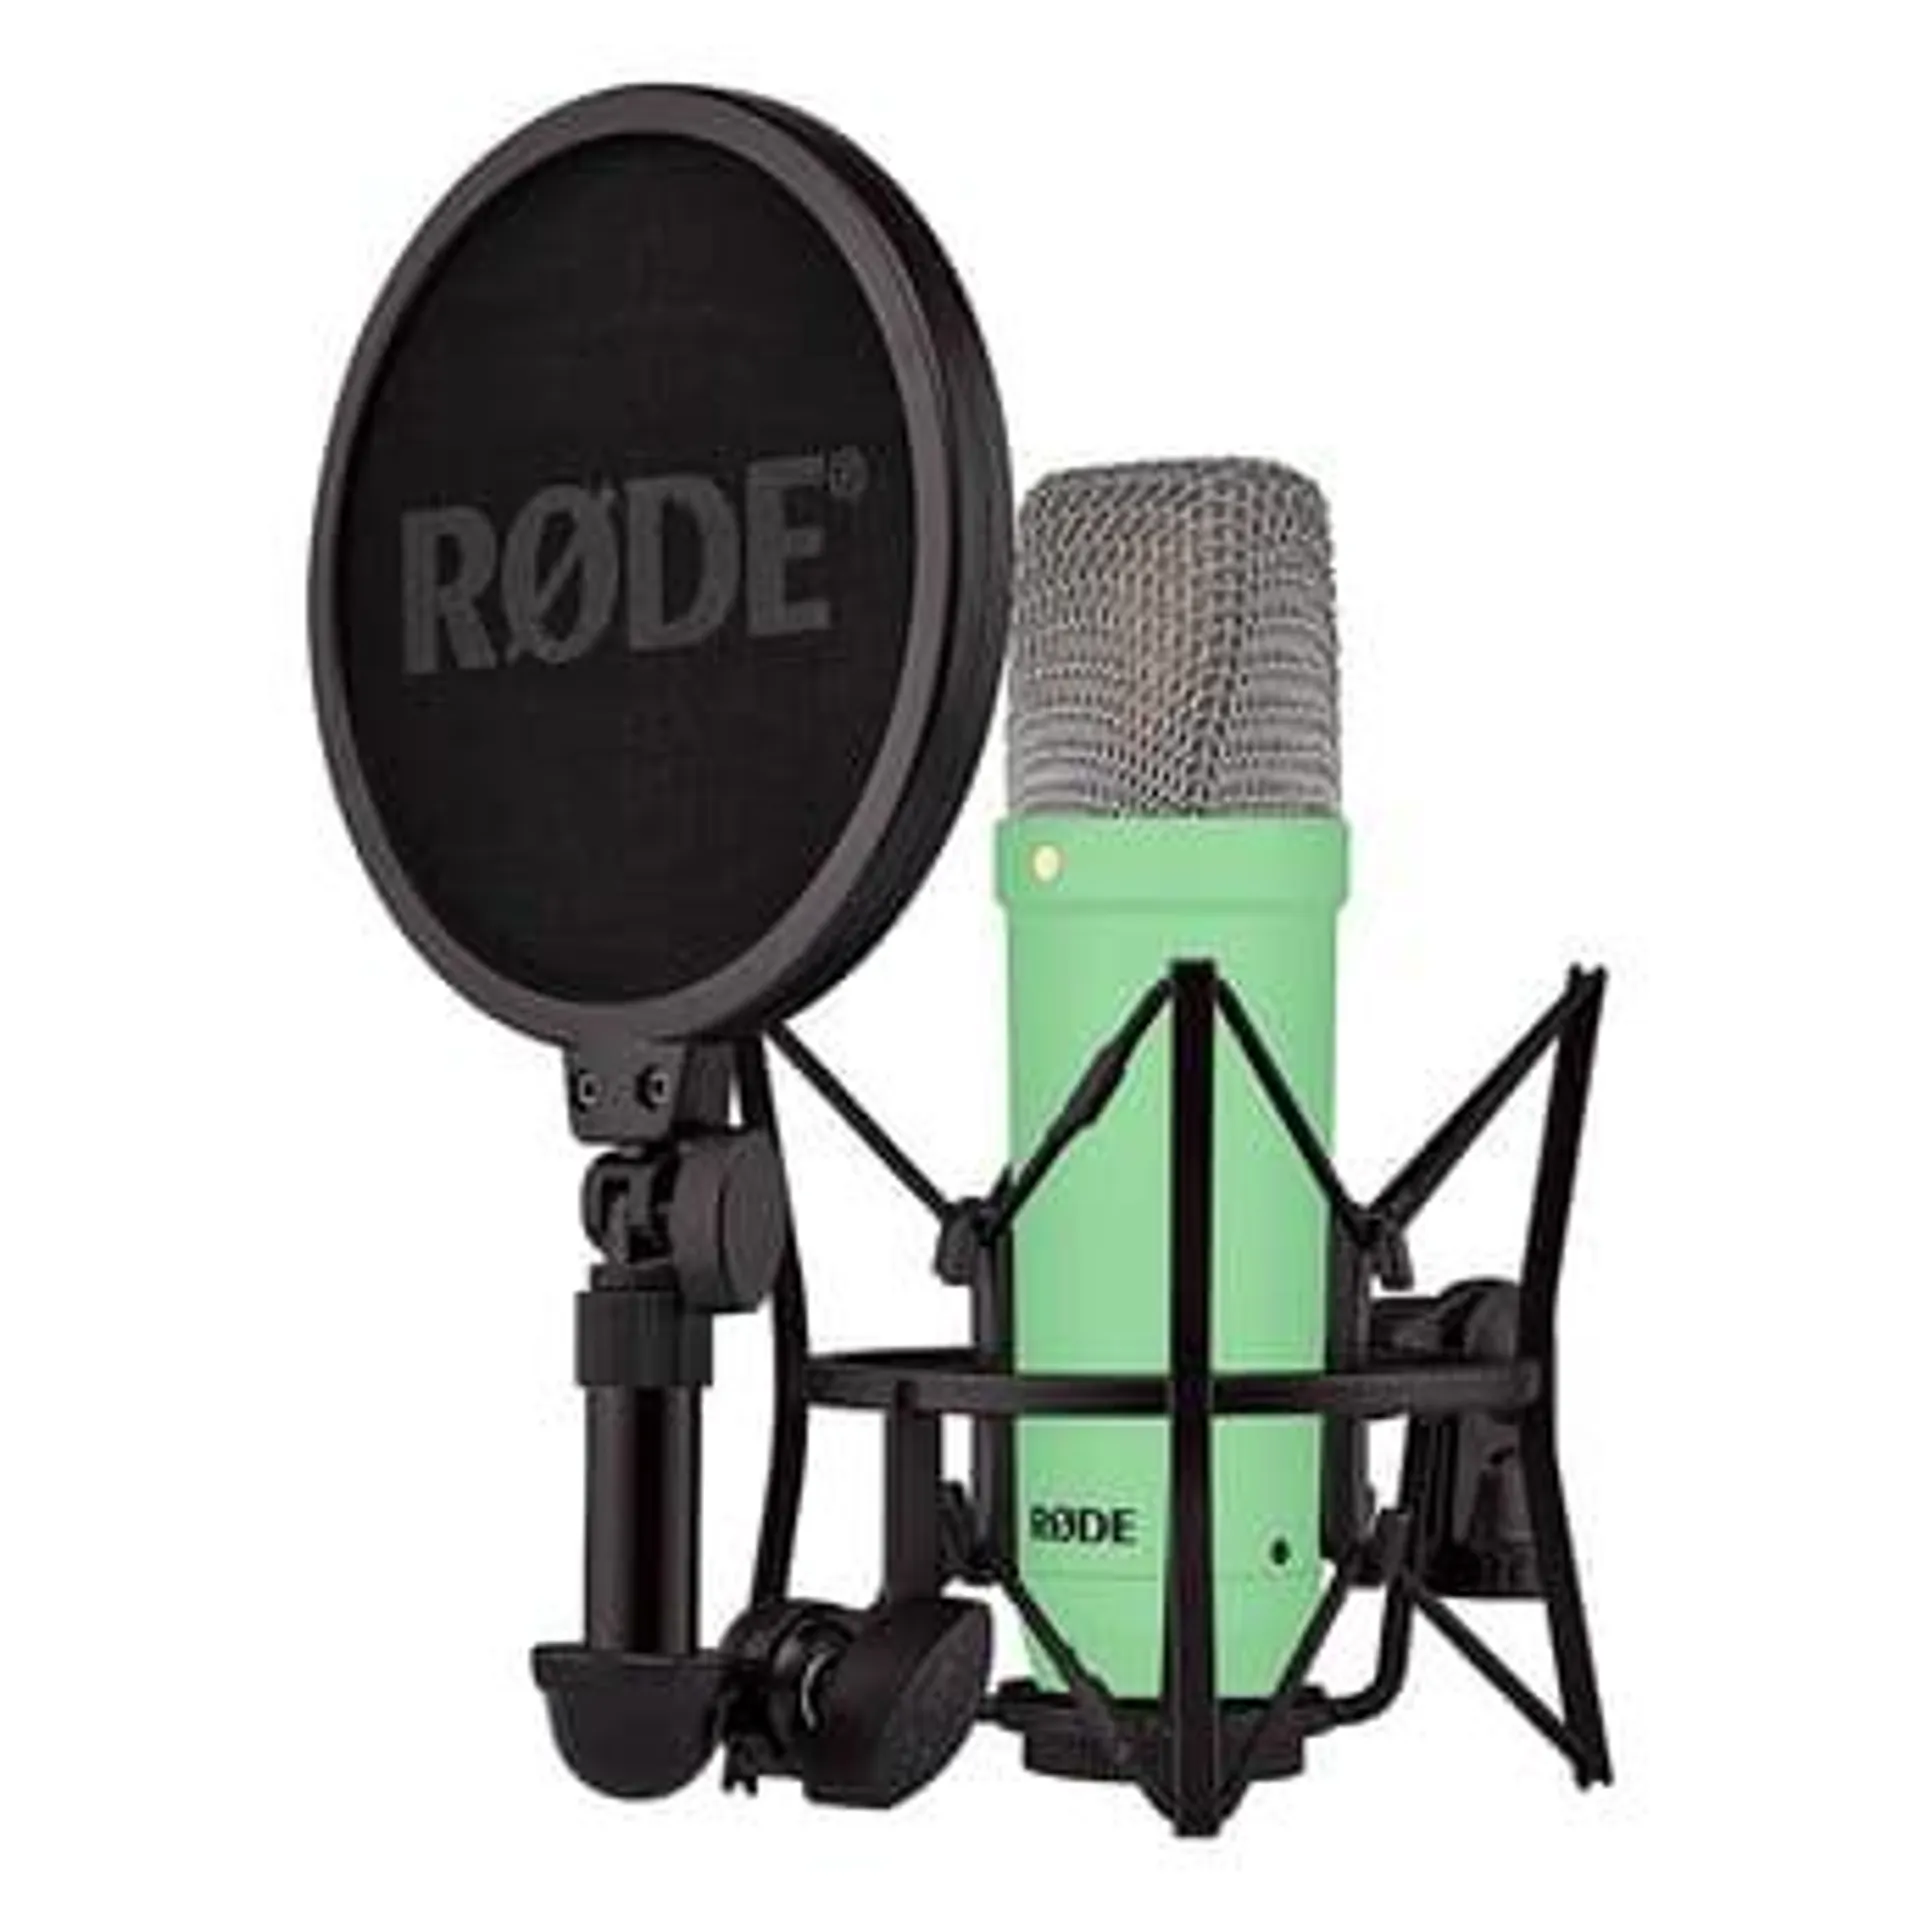 RODE NT1 Signature Series Condenser Microphone (Green)